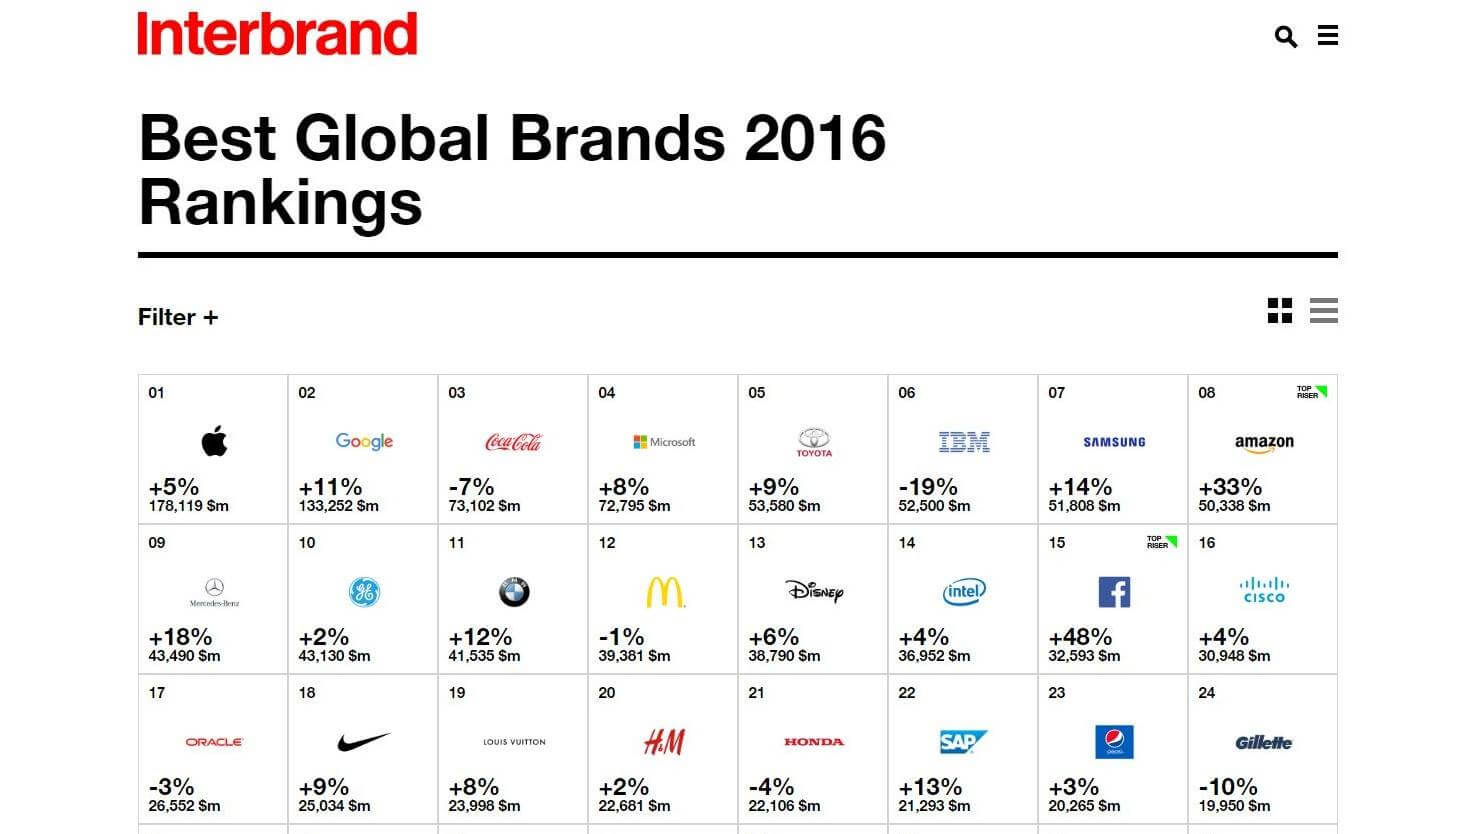 My thought about this Best Global Brands 2016 report by Interbrand